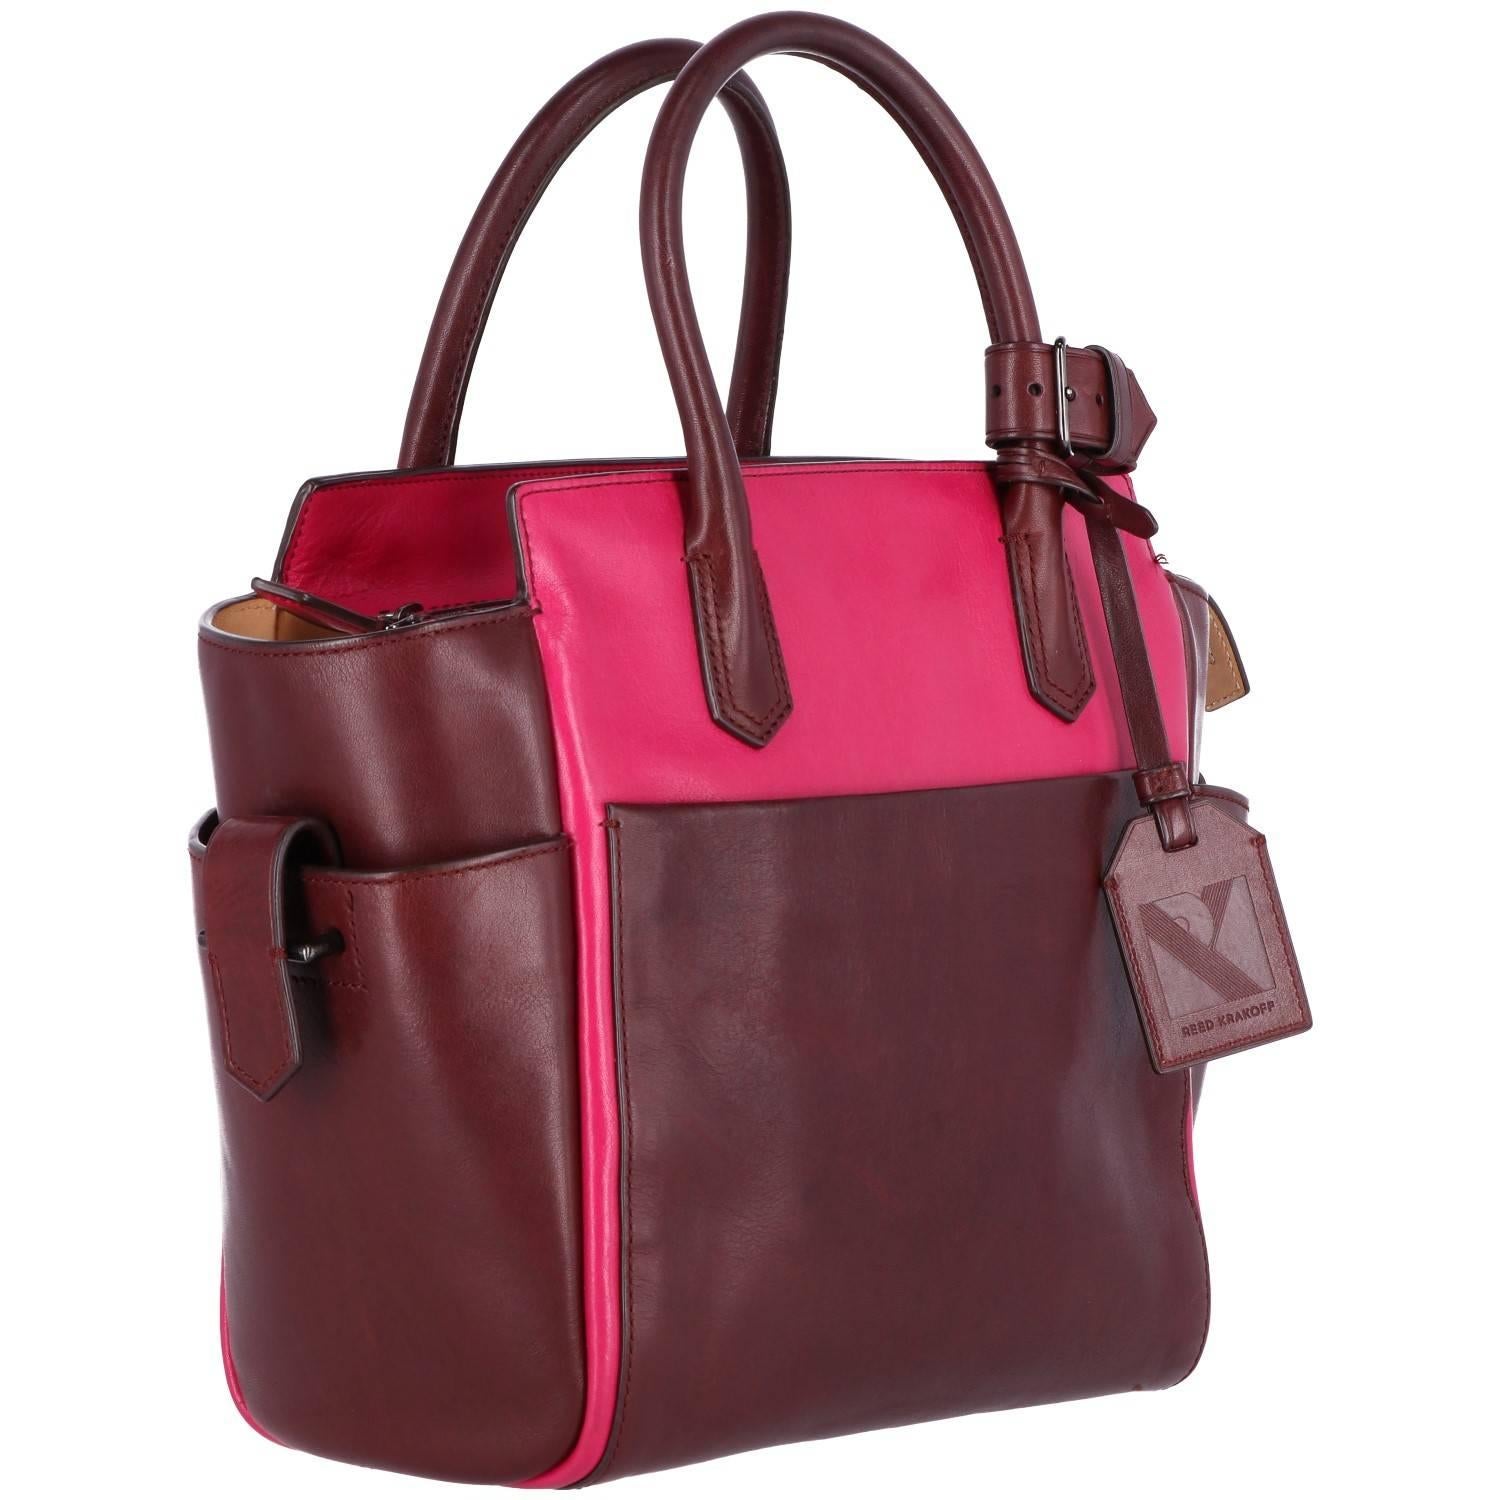 Reed Krakoff bag in a brilliant magenta leather. The inside lining features a zipped pocket and two open pockets. Also features three pockets on the outside and zip fastener. The bag comes with its address tag and belt for keeping the handles